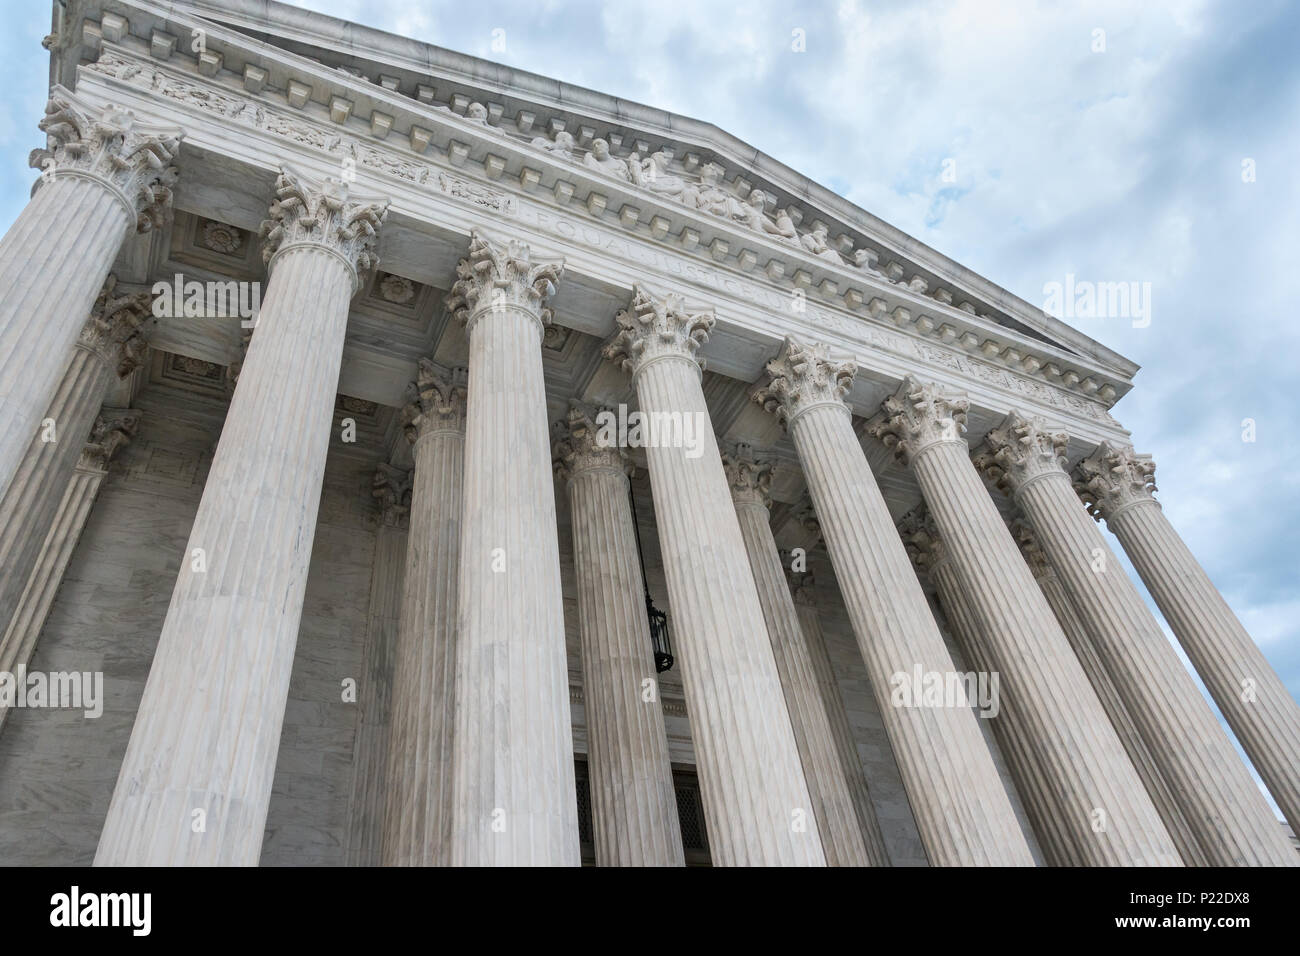 Imposing columns of US Supreme Court Building, Washington, DC, reaching to the heavens fro inspiration. Stock Photo